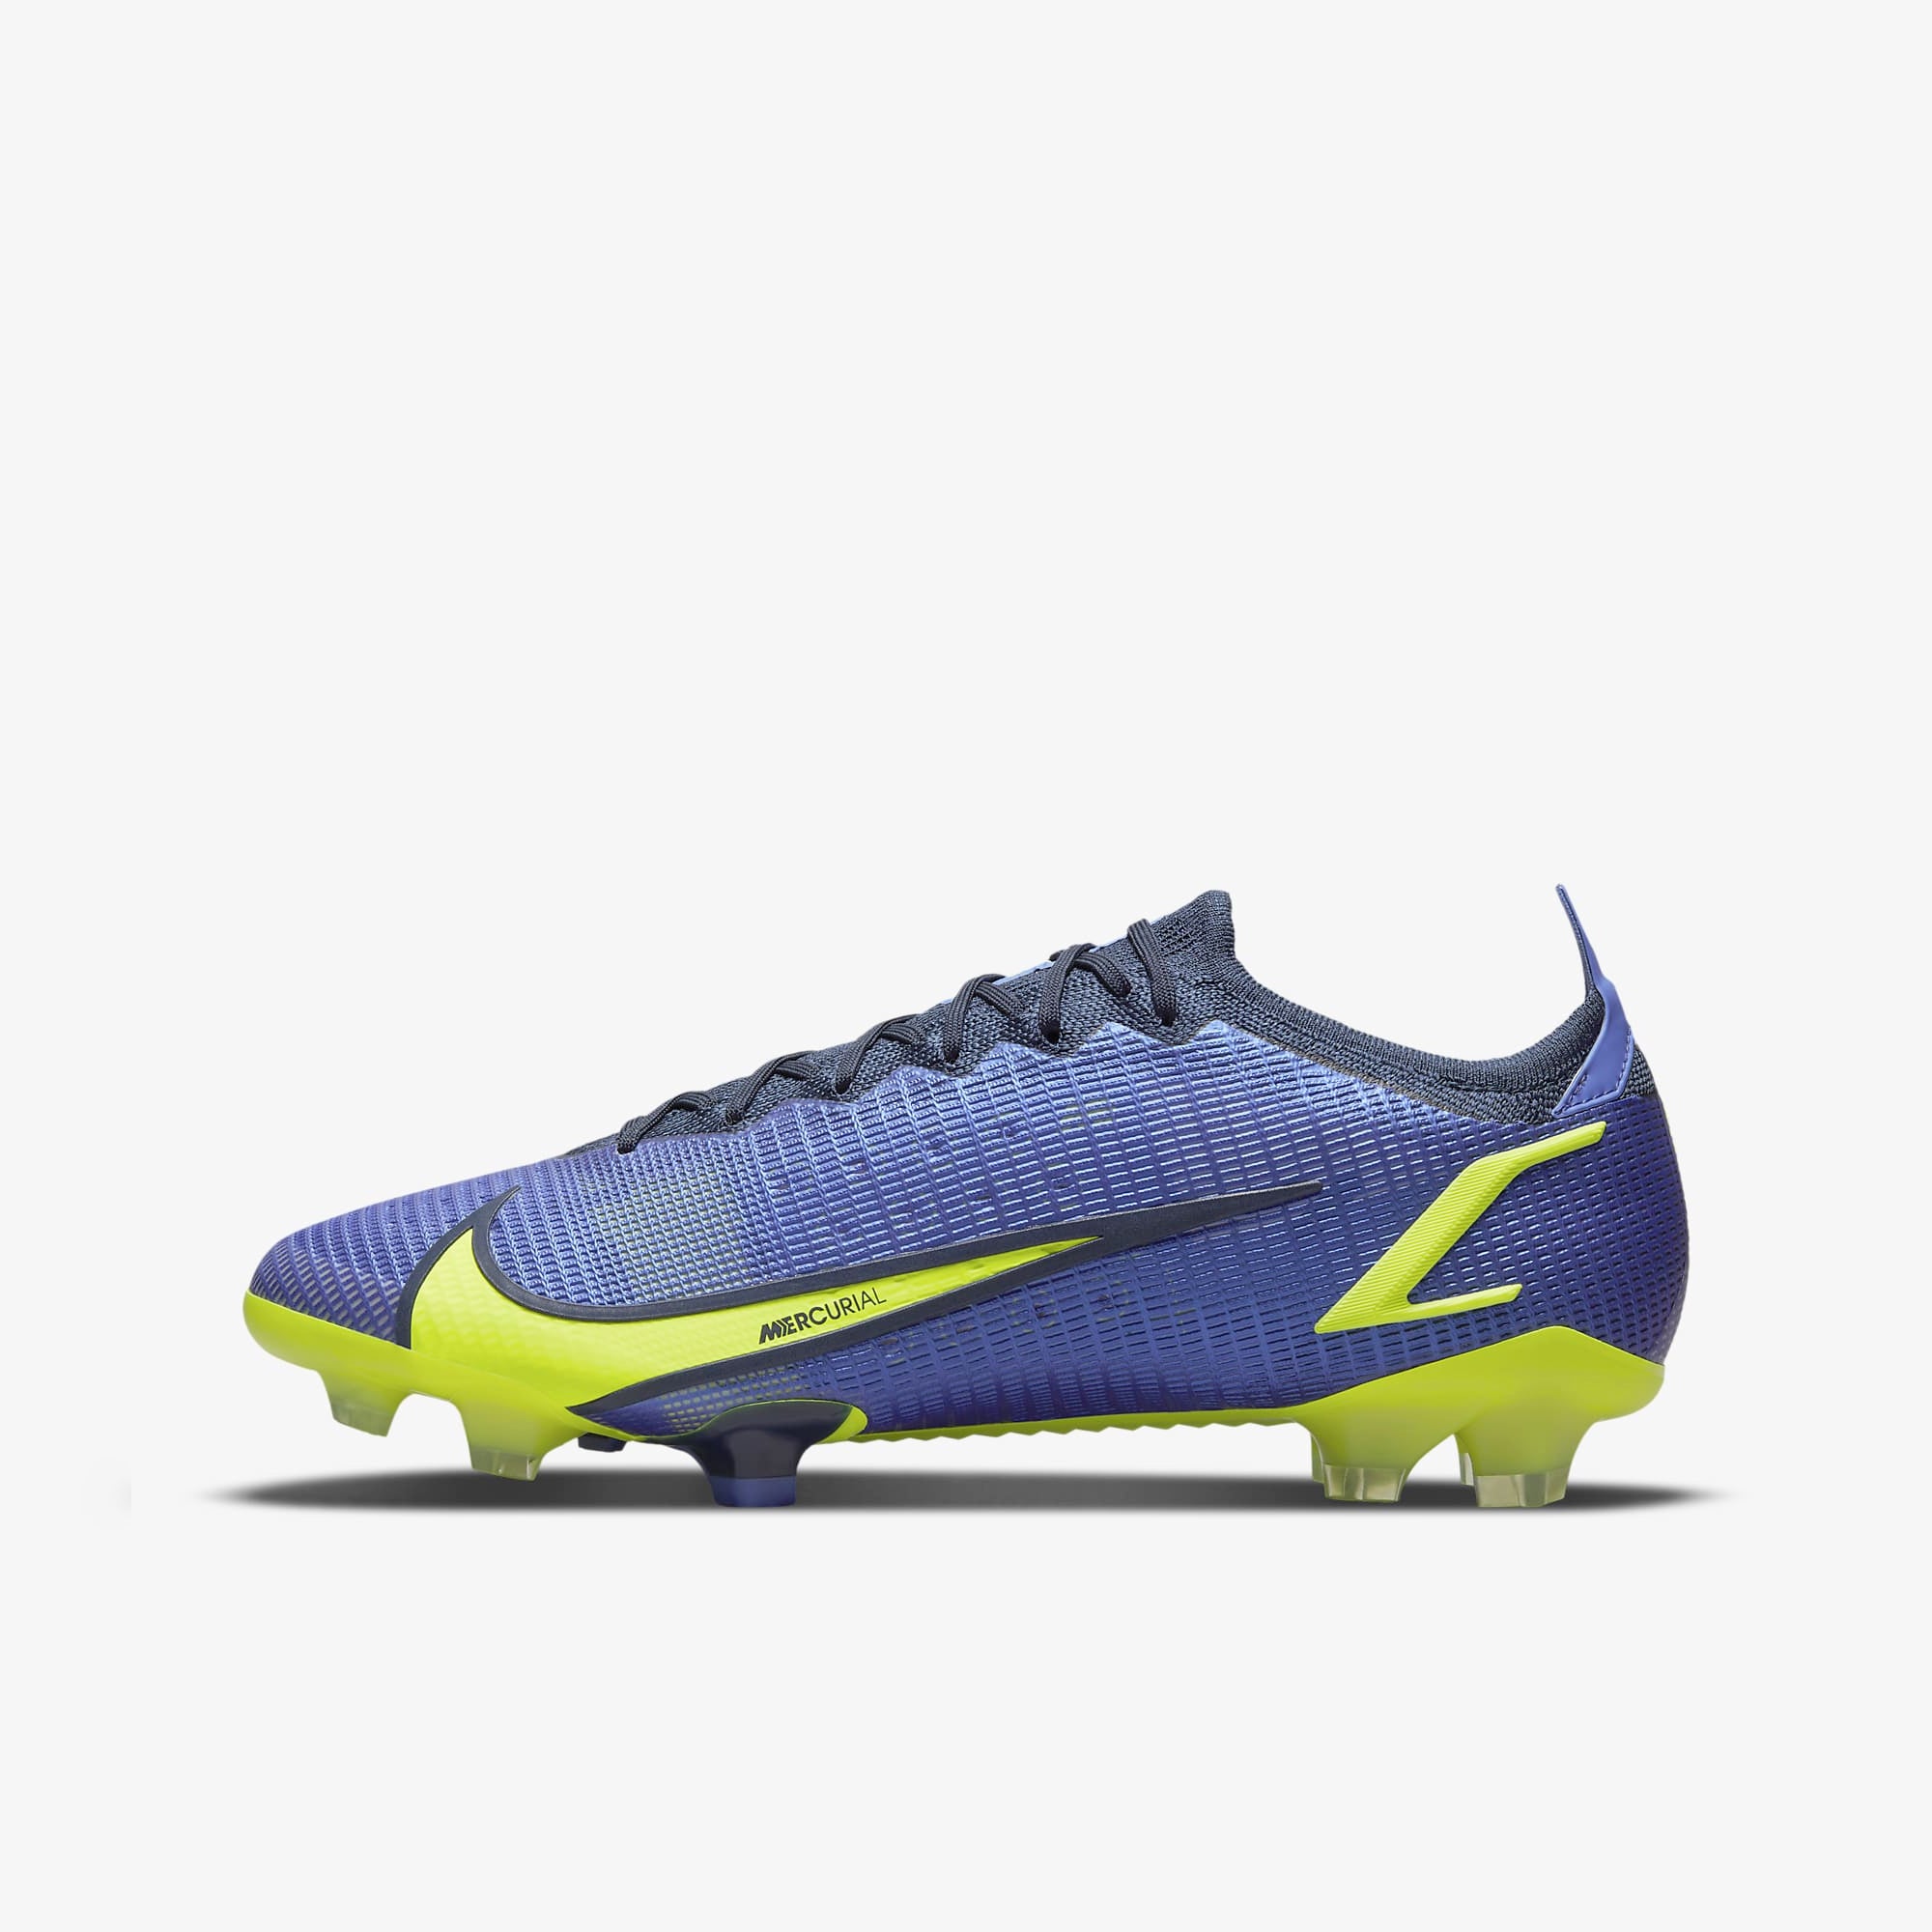 Nike Mercurial Elite FG Firm-Ground Soccer Cleats